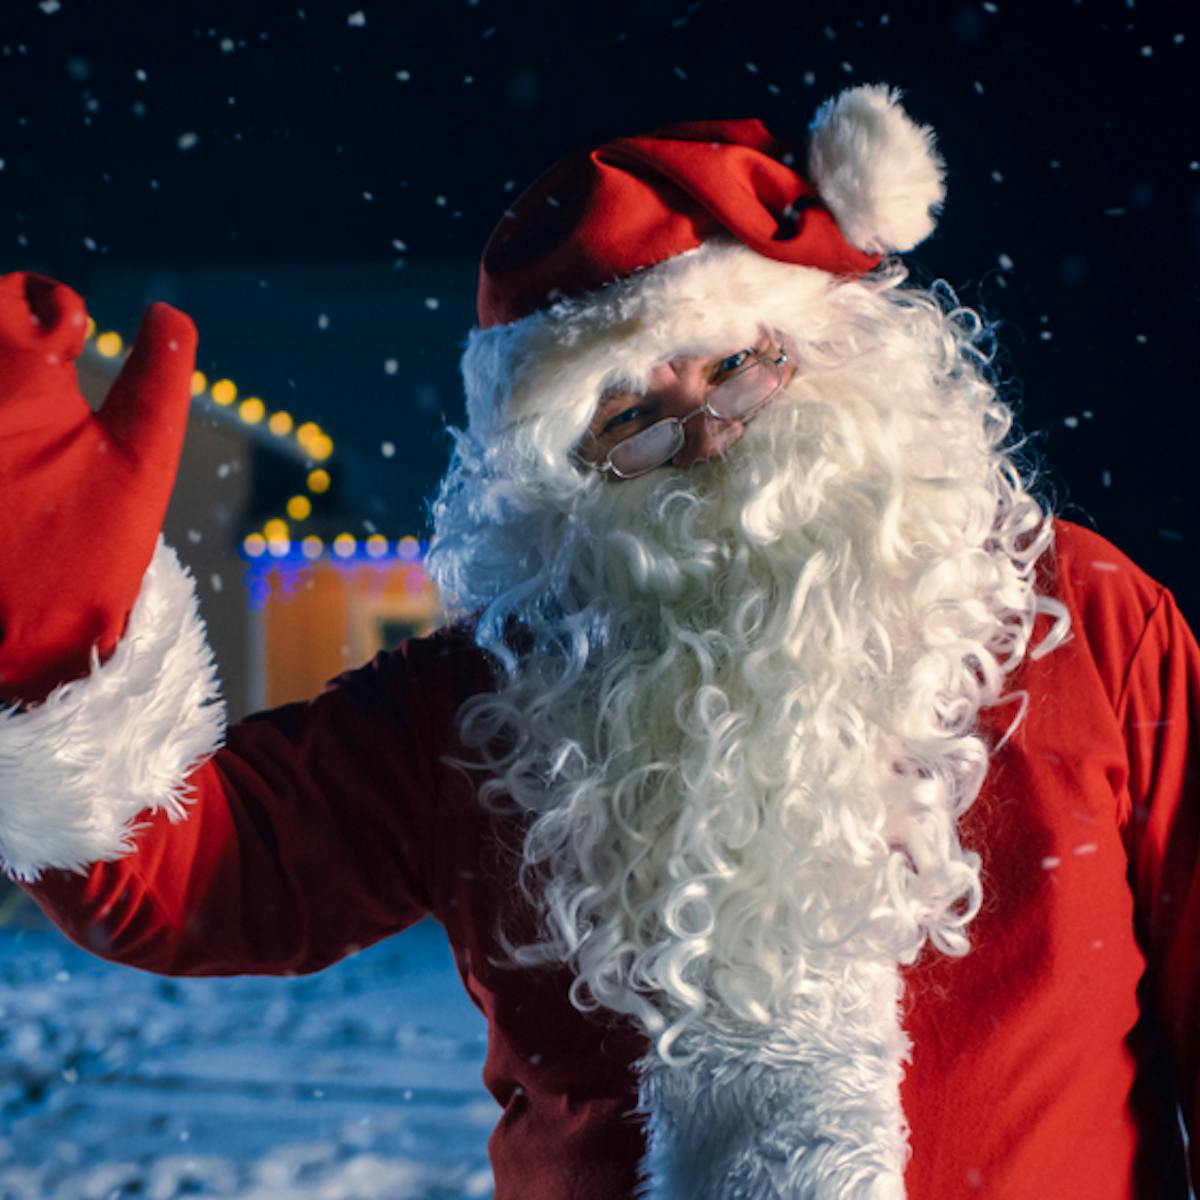 The business of Santa Claus in Lapland – a magical marketing gift